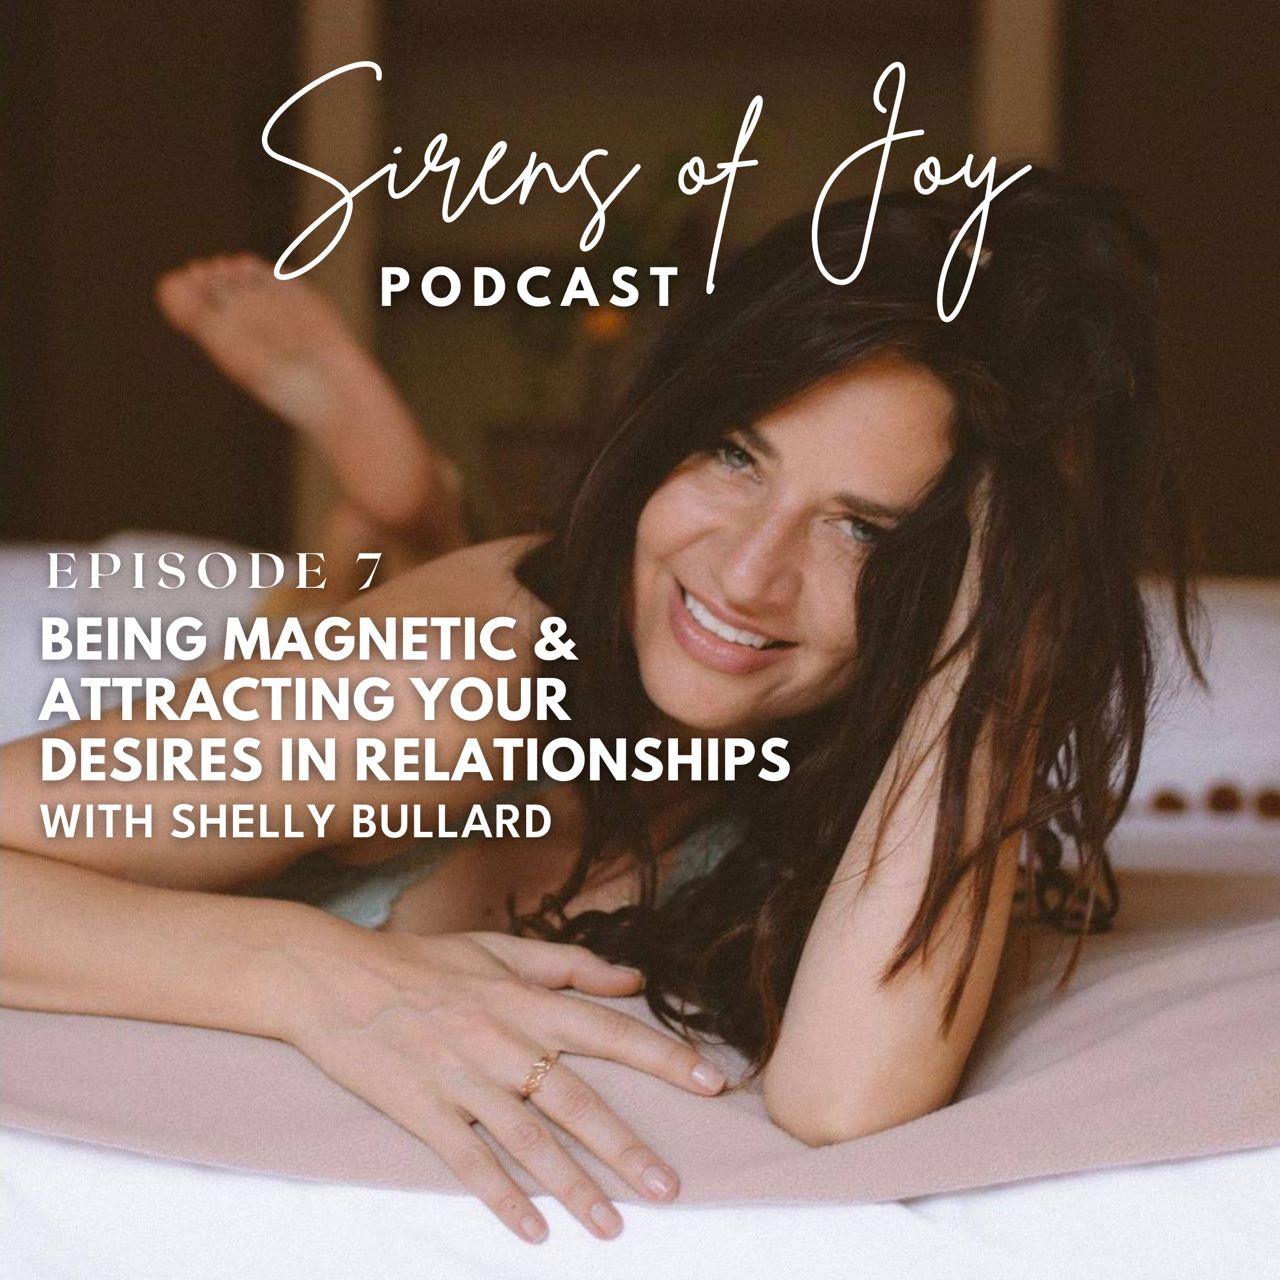 Episode 7 - Being Magnetic & Attracting Your Desires in Relationships with Shelly Bullard